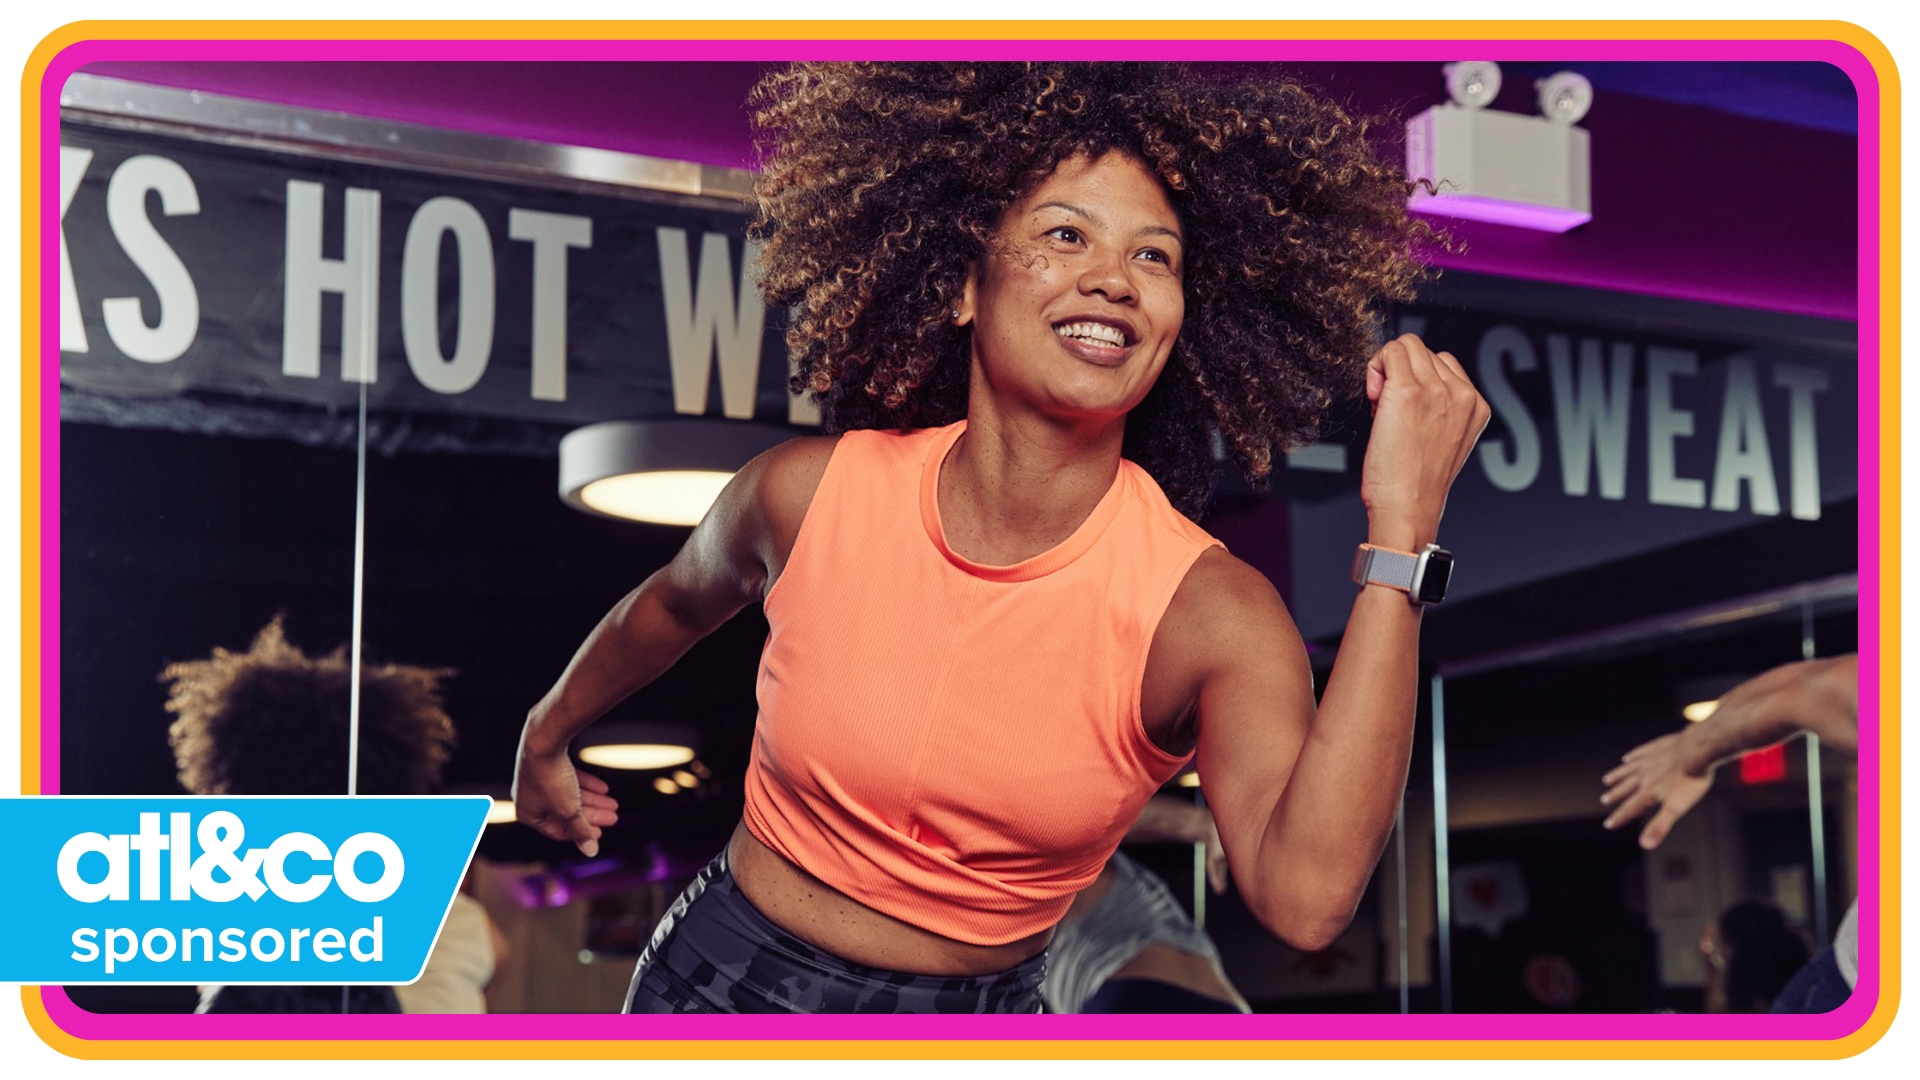 Celebrate today with these tips on making dance part of your fitness routine. | PAID CONTENT